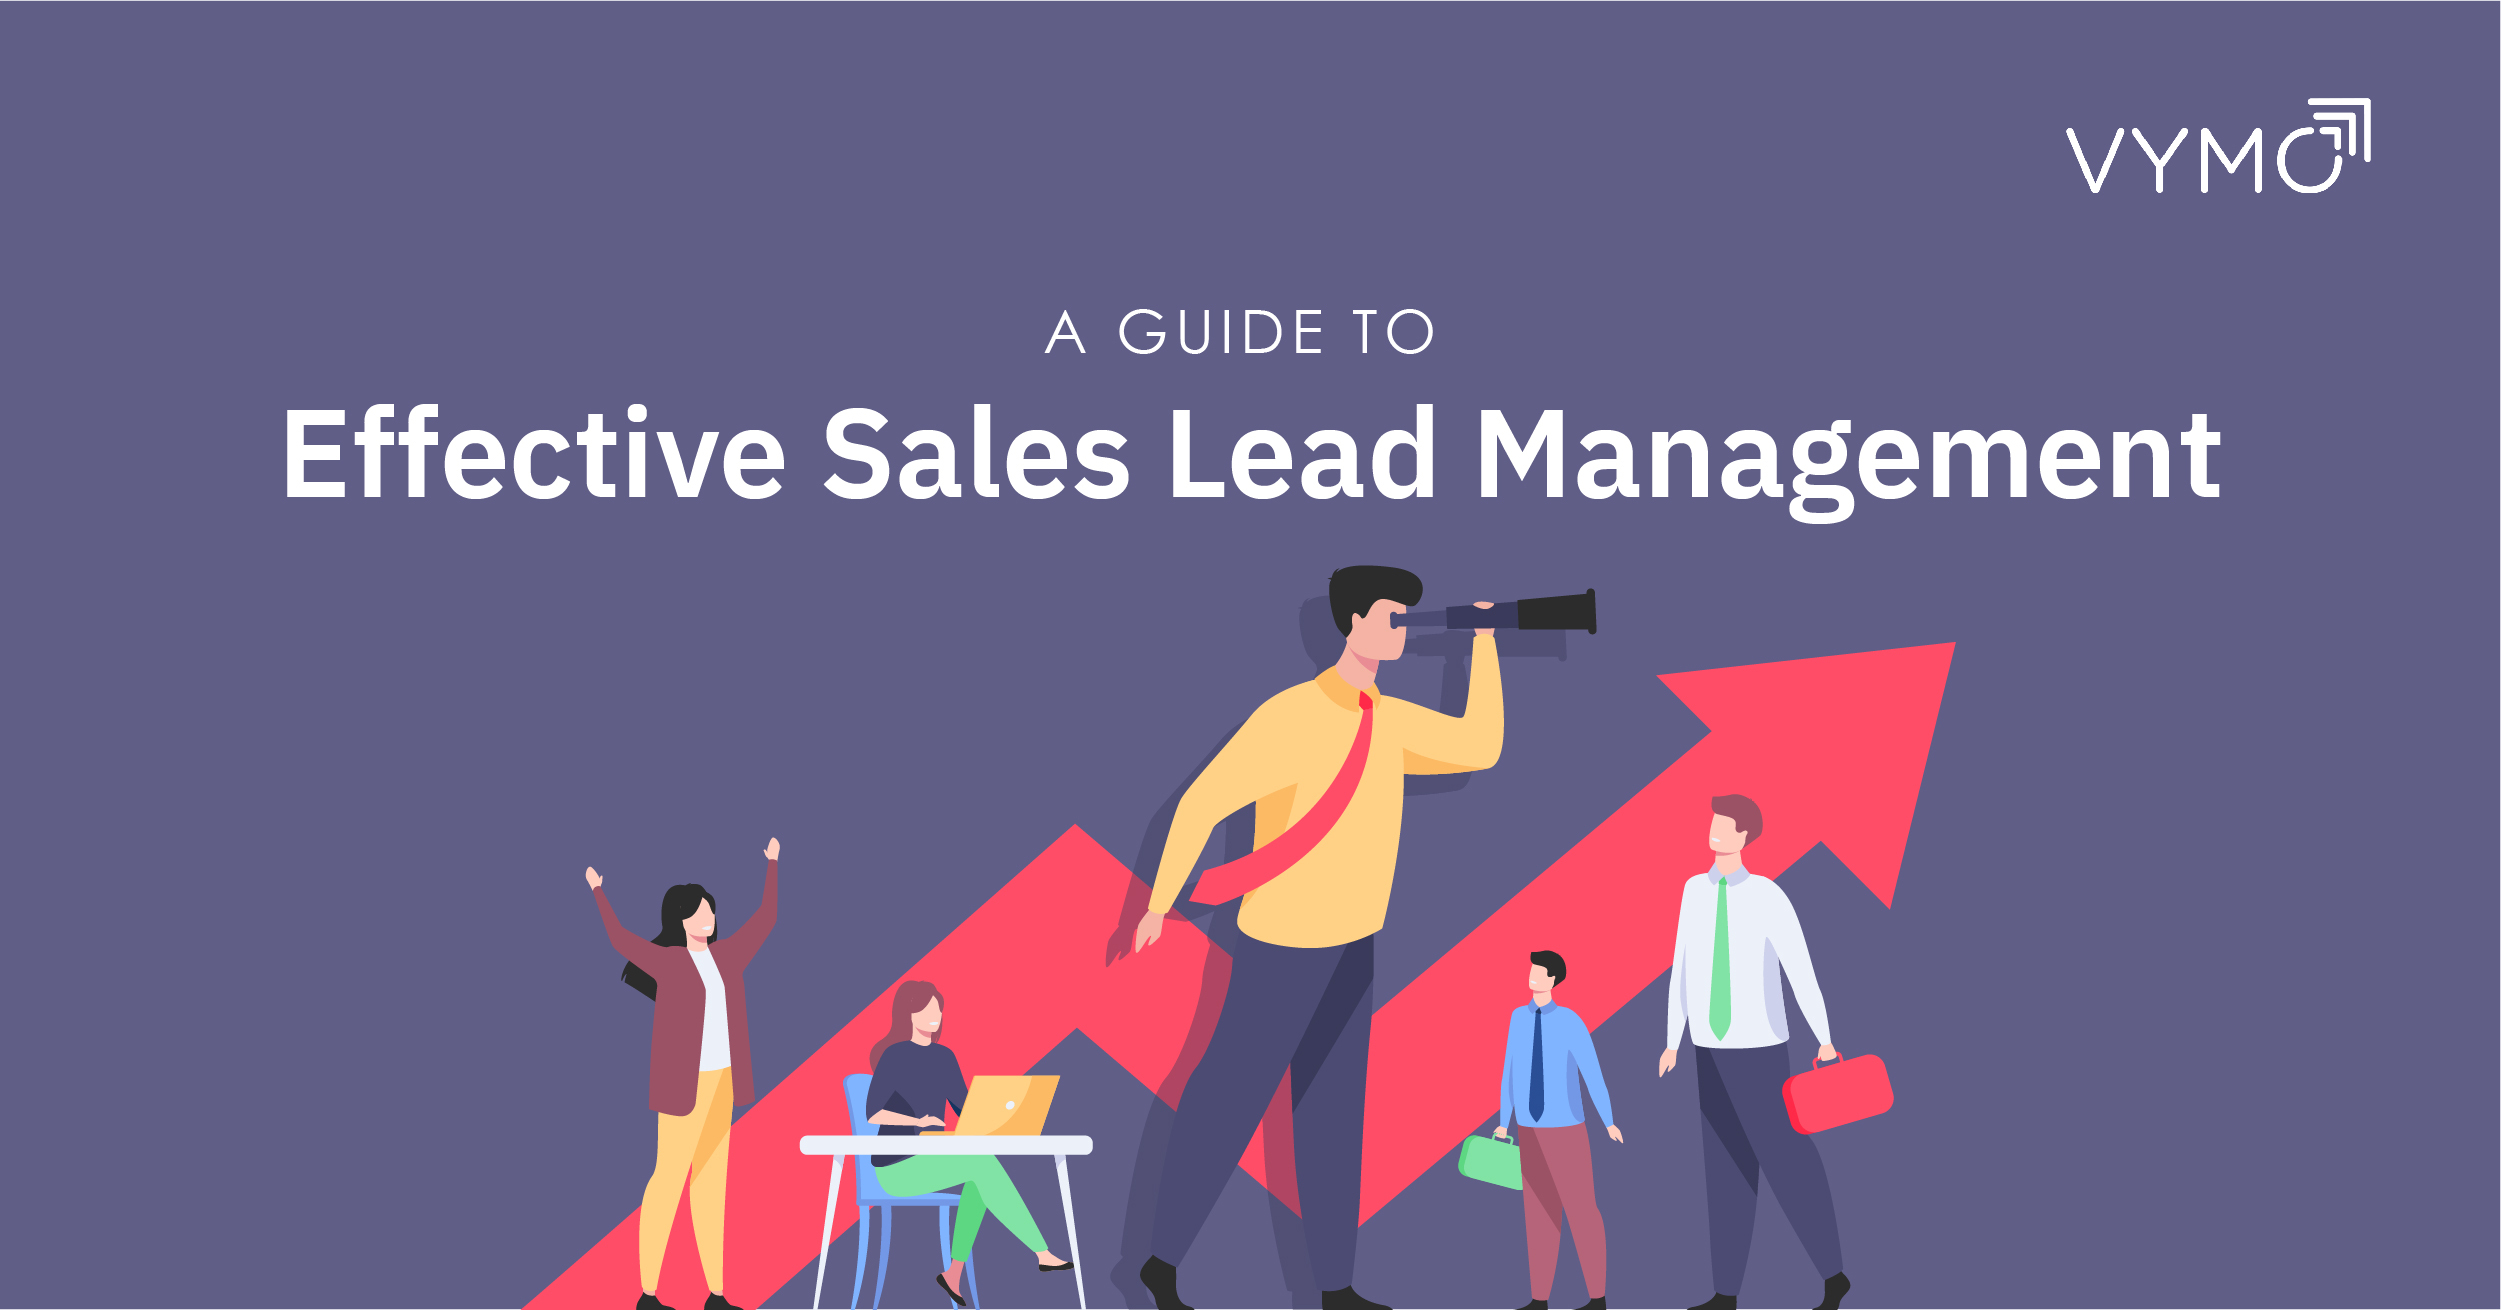 A guide to effective sales lead management.